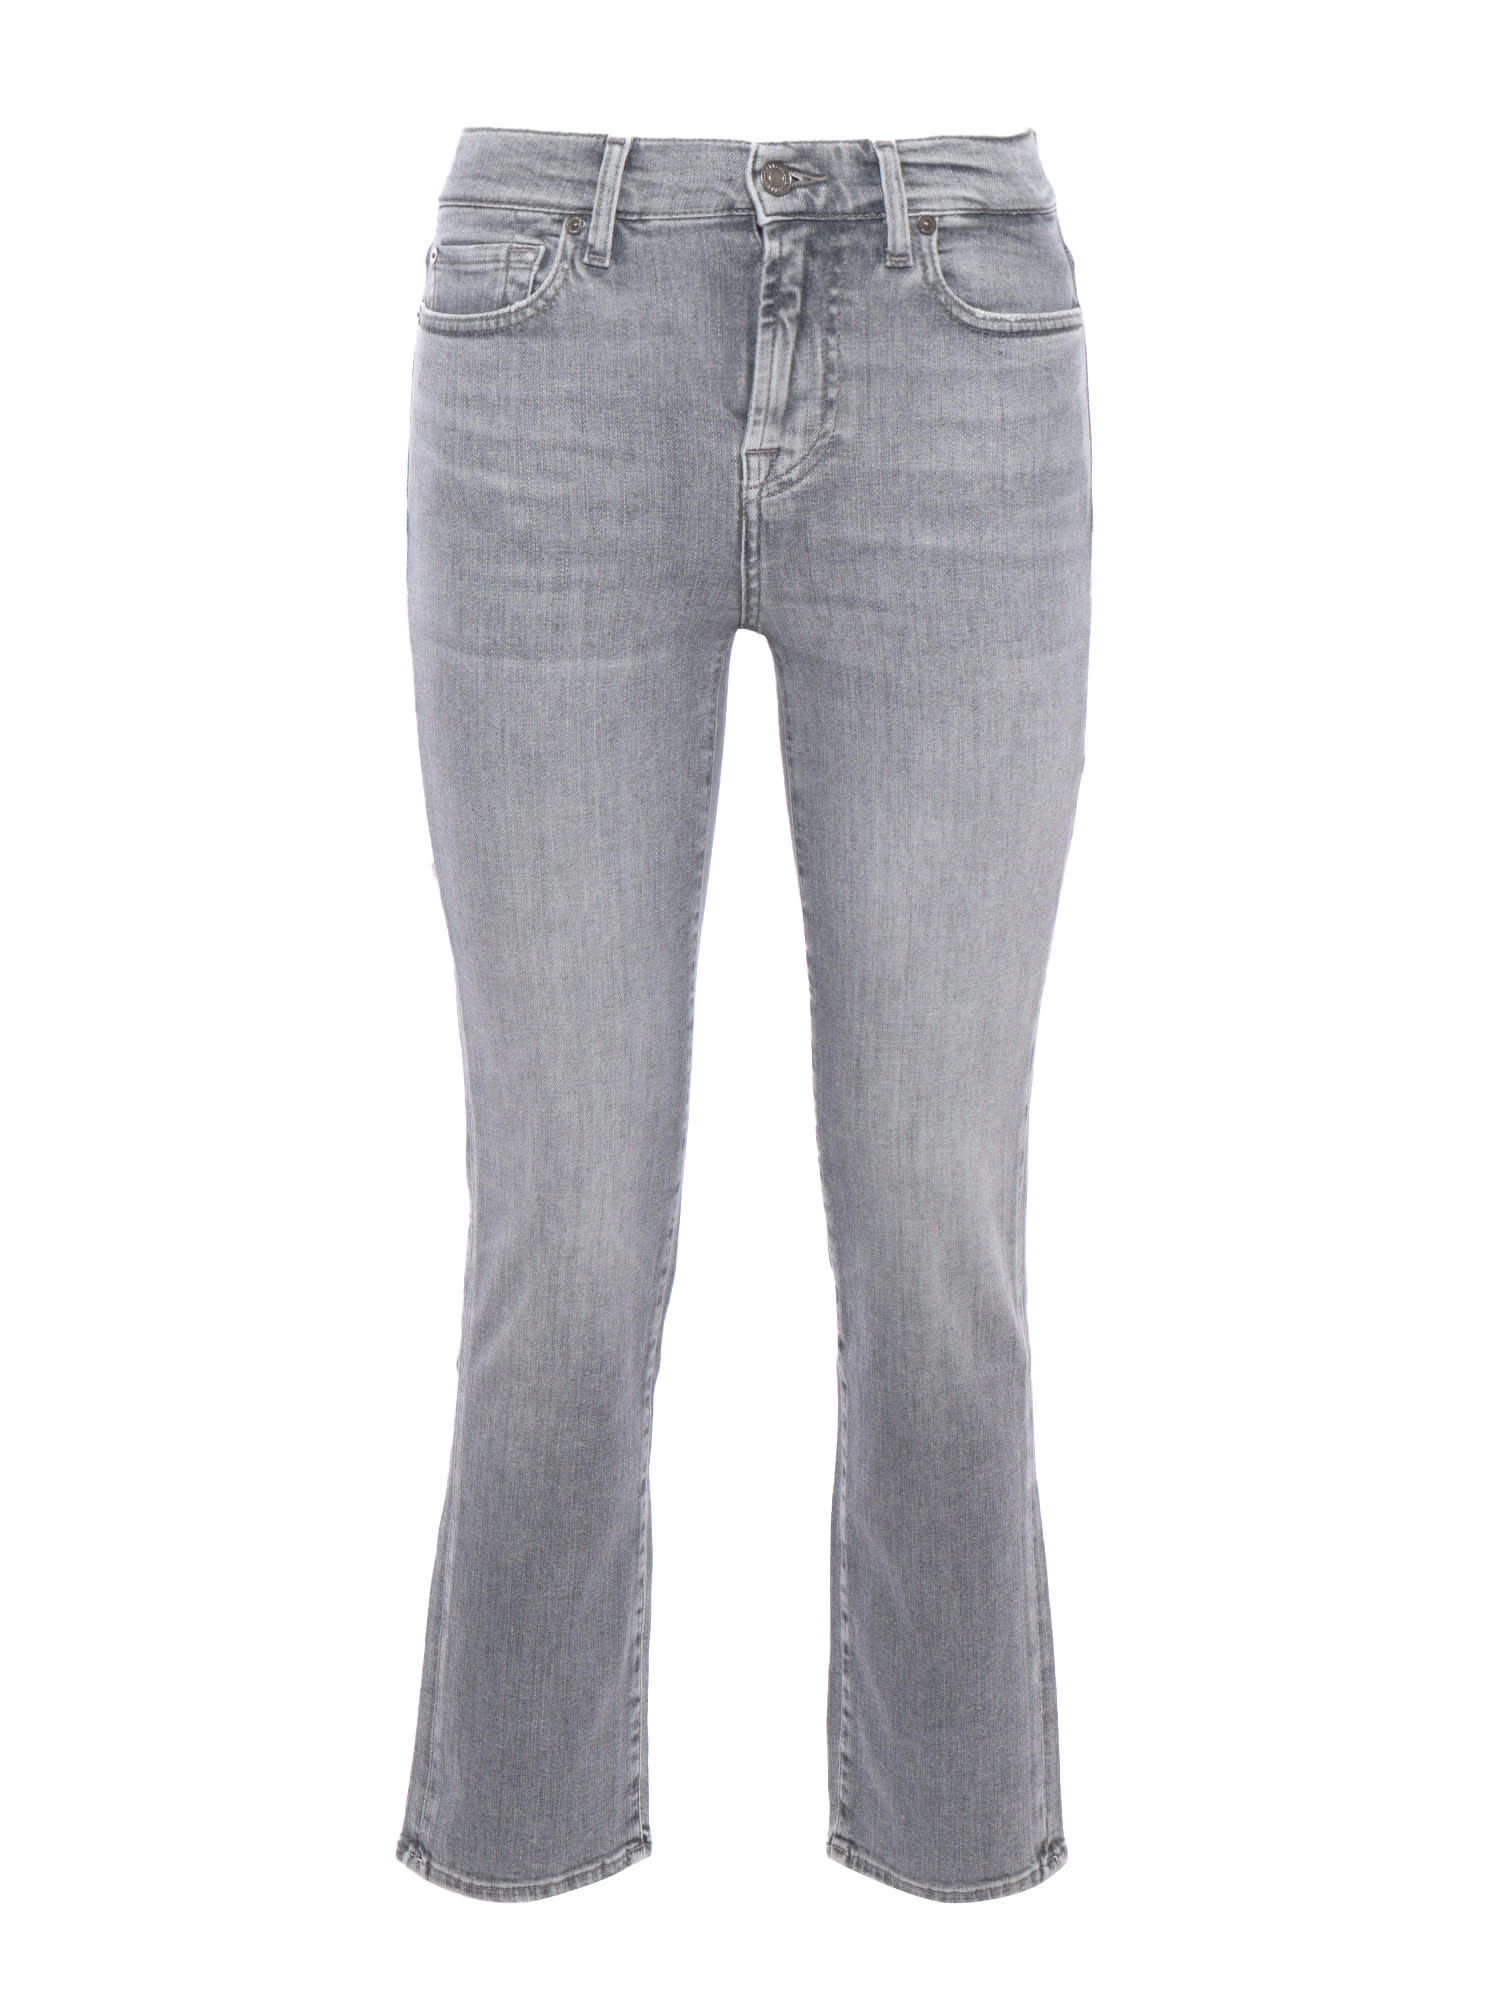 Shop 7 For All Mankind Cropped Womens Jeans. In Grey